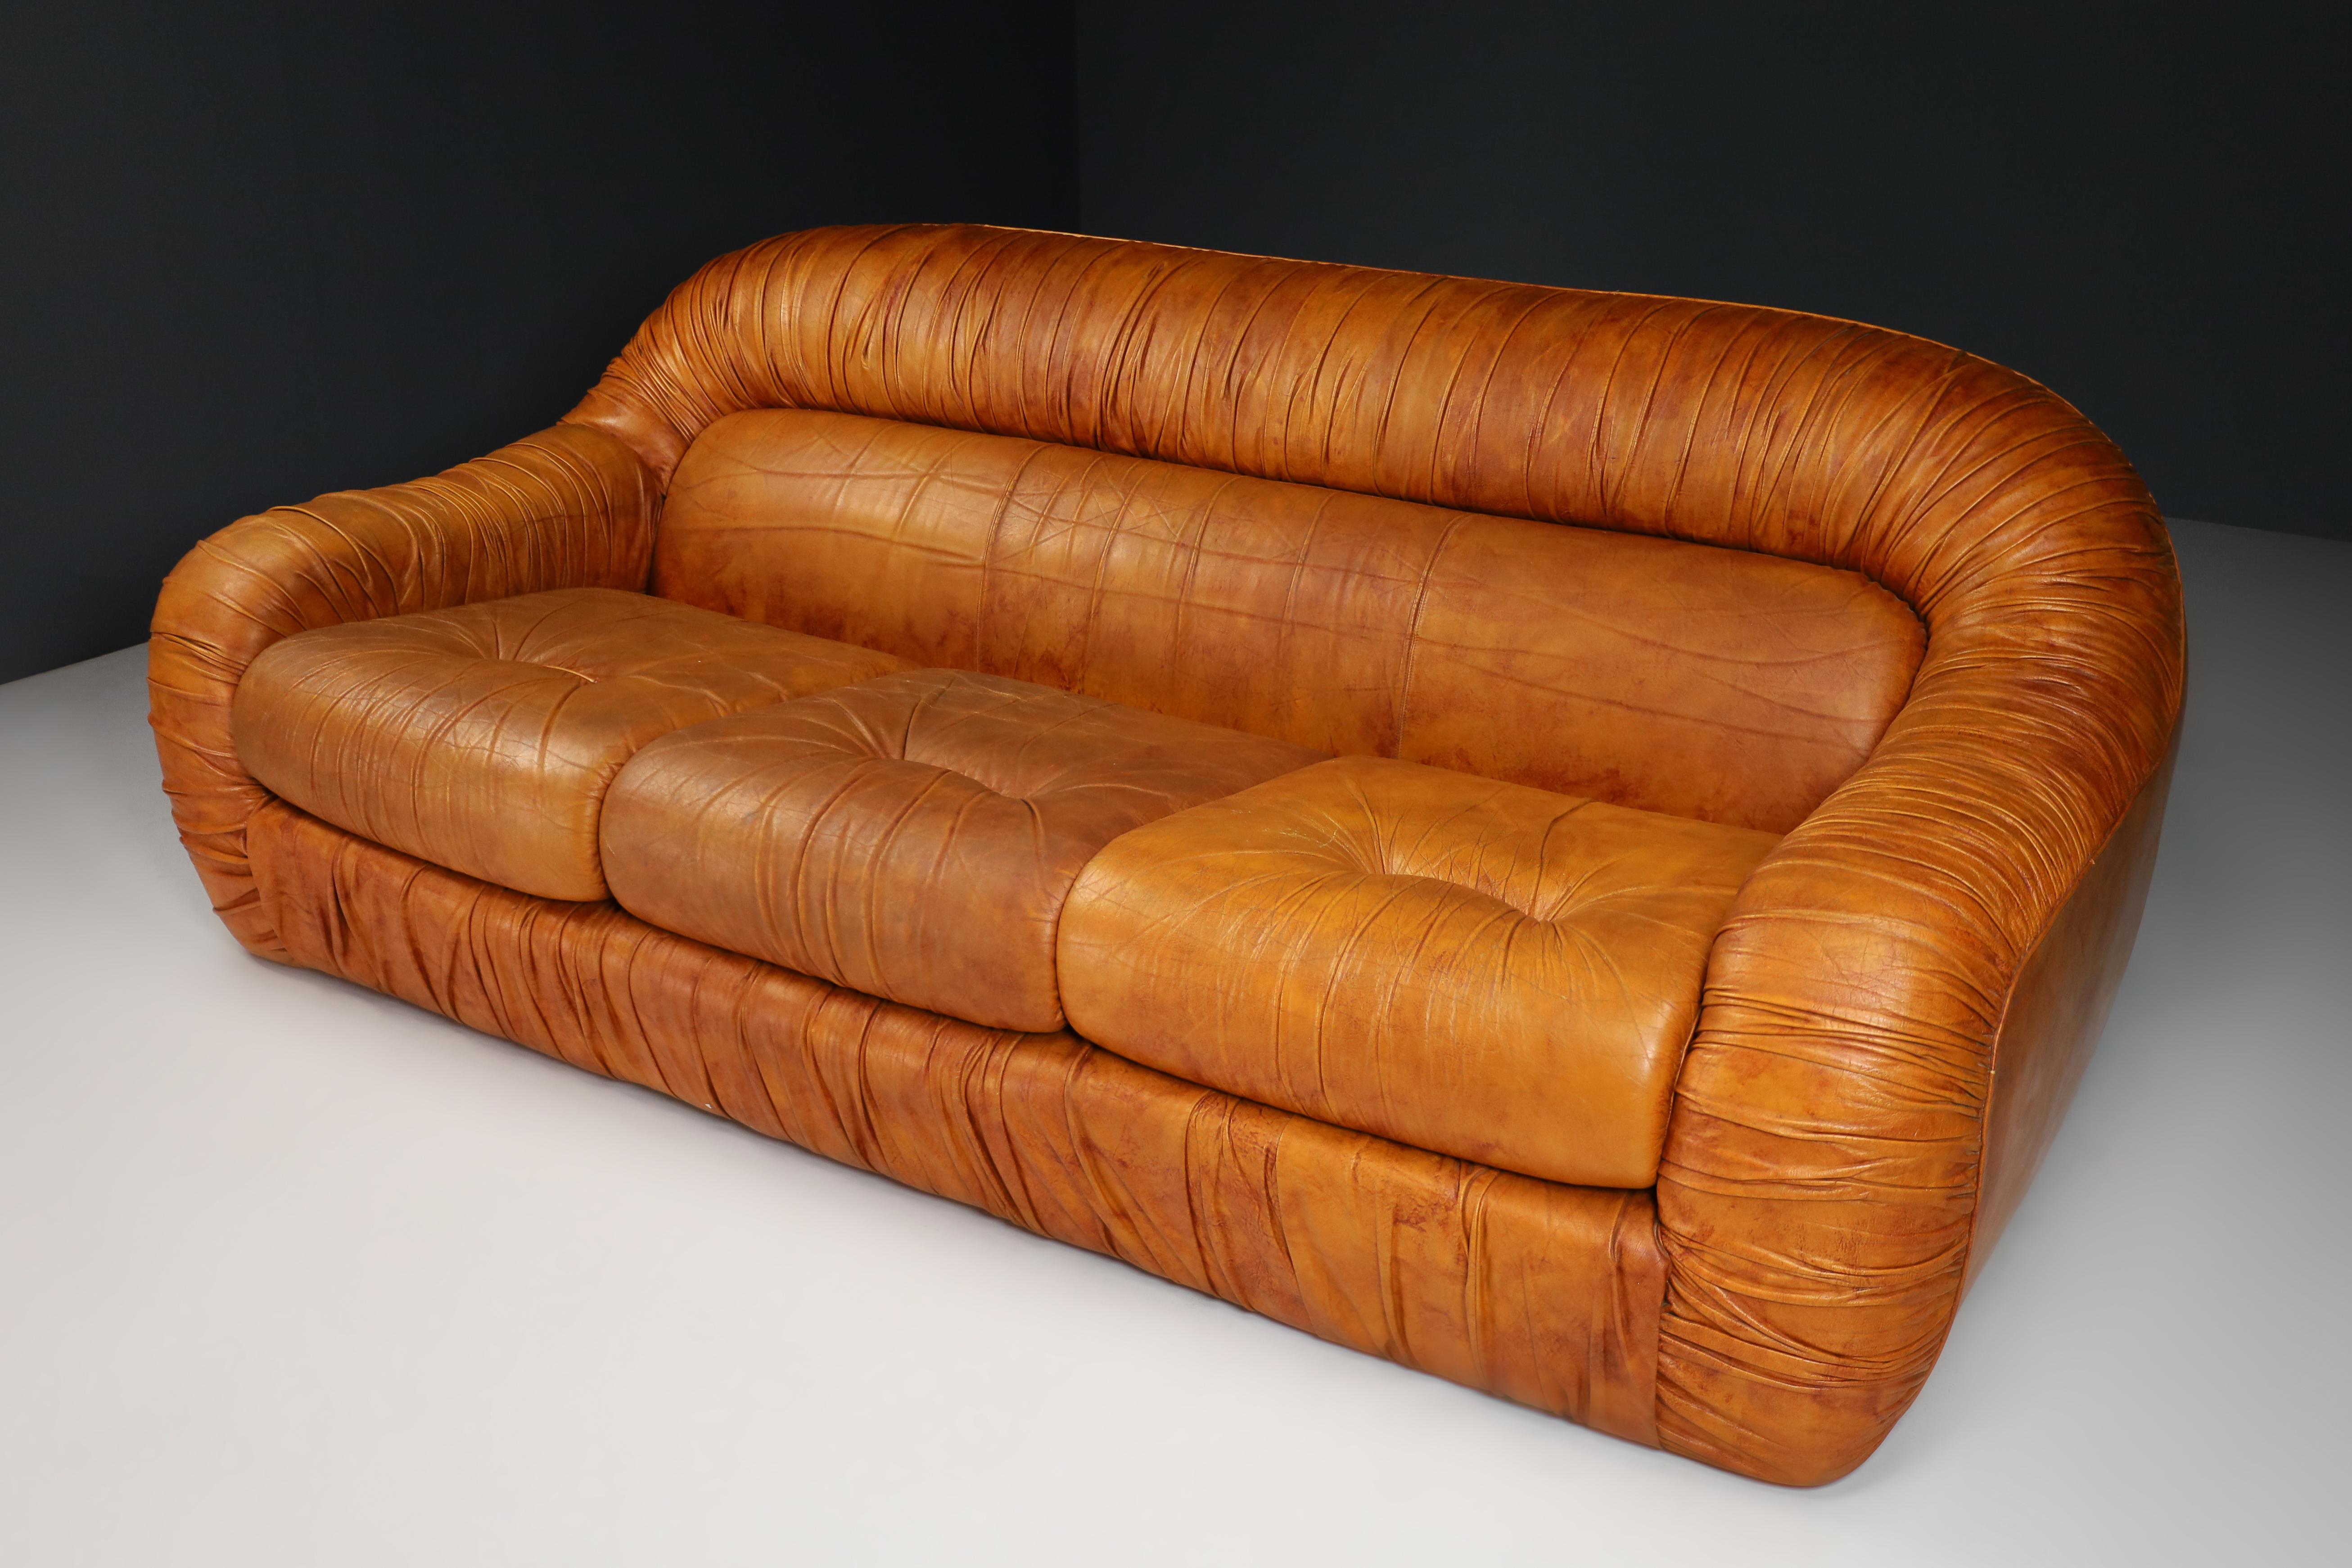 Lounge Sofa in Cognac Leather by George Bighinello for Eurosalotto, Italy, 1970s For Sale 2